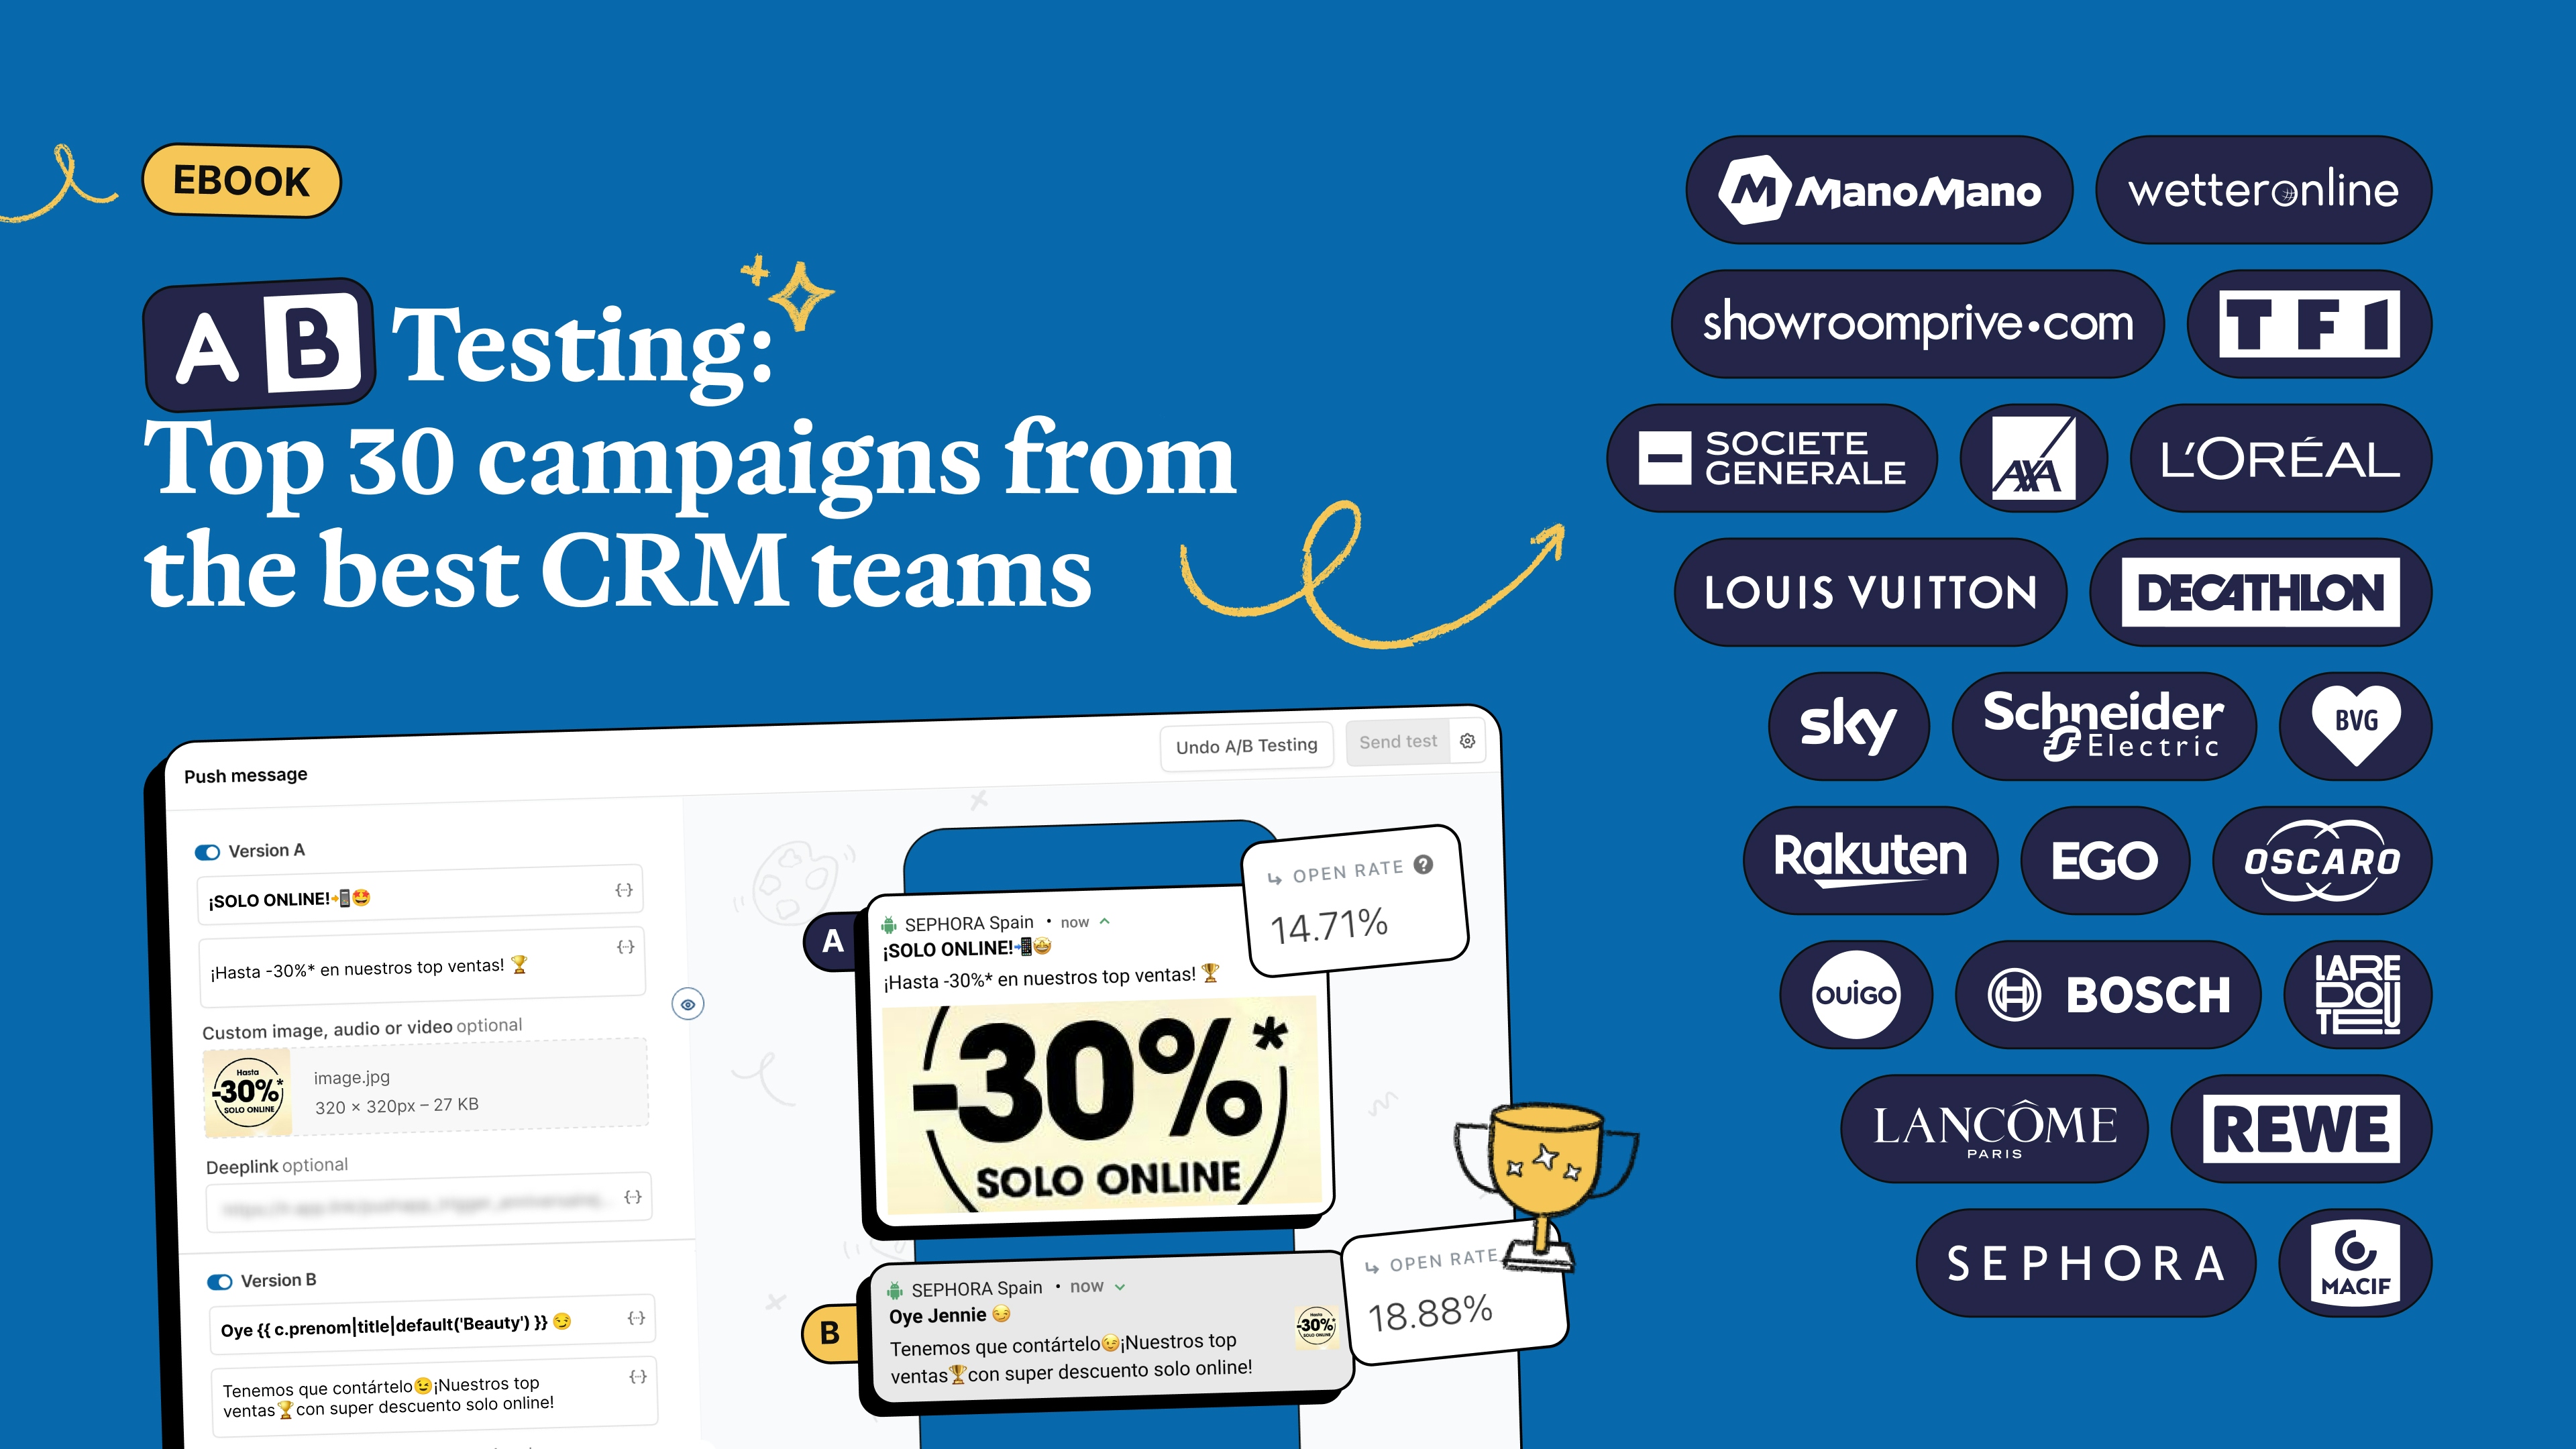 A/B Testing: Top 30 campaigns from the best CRM teams